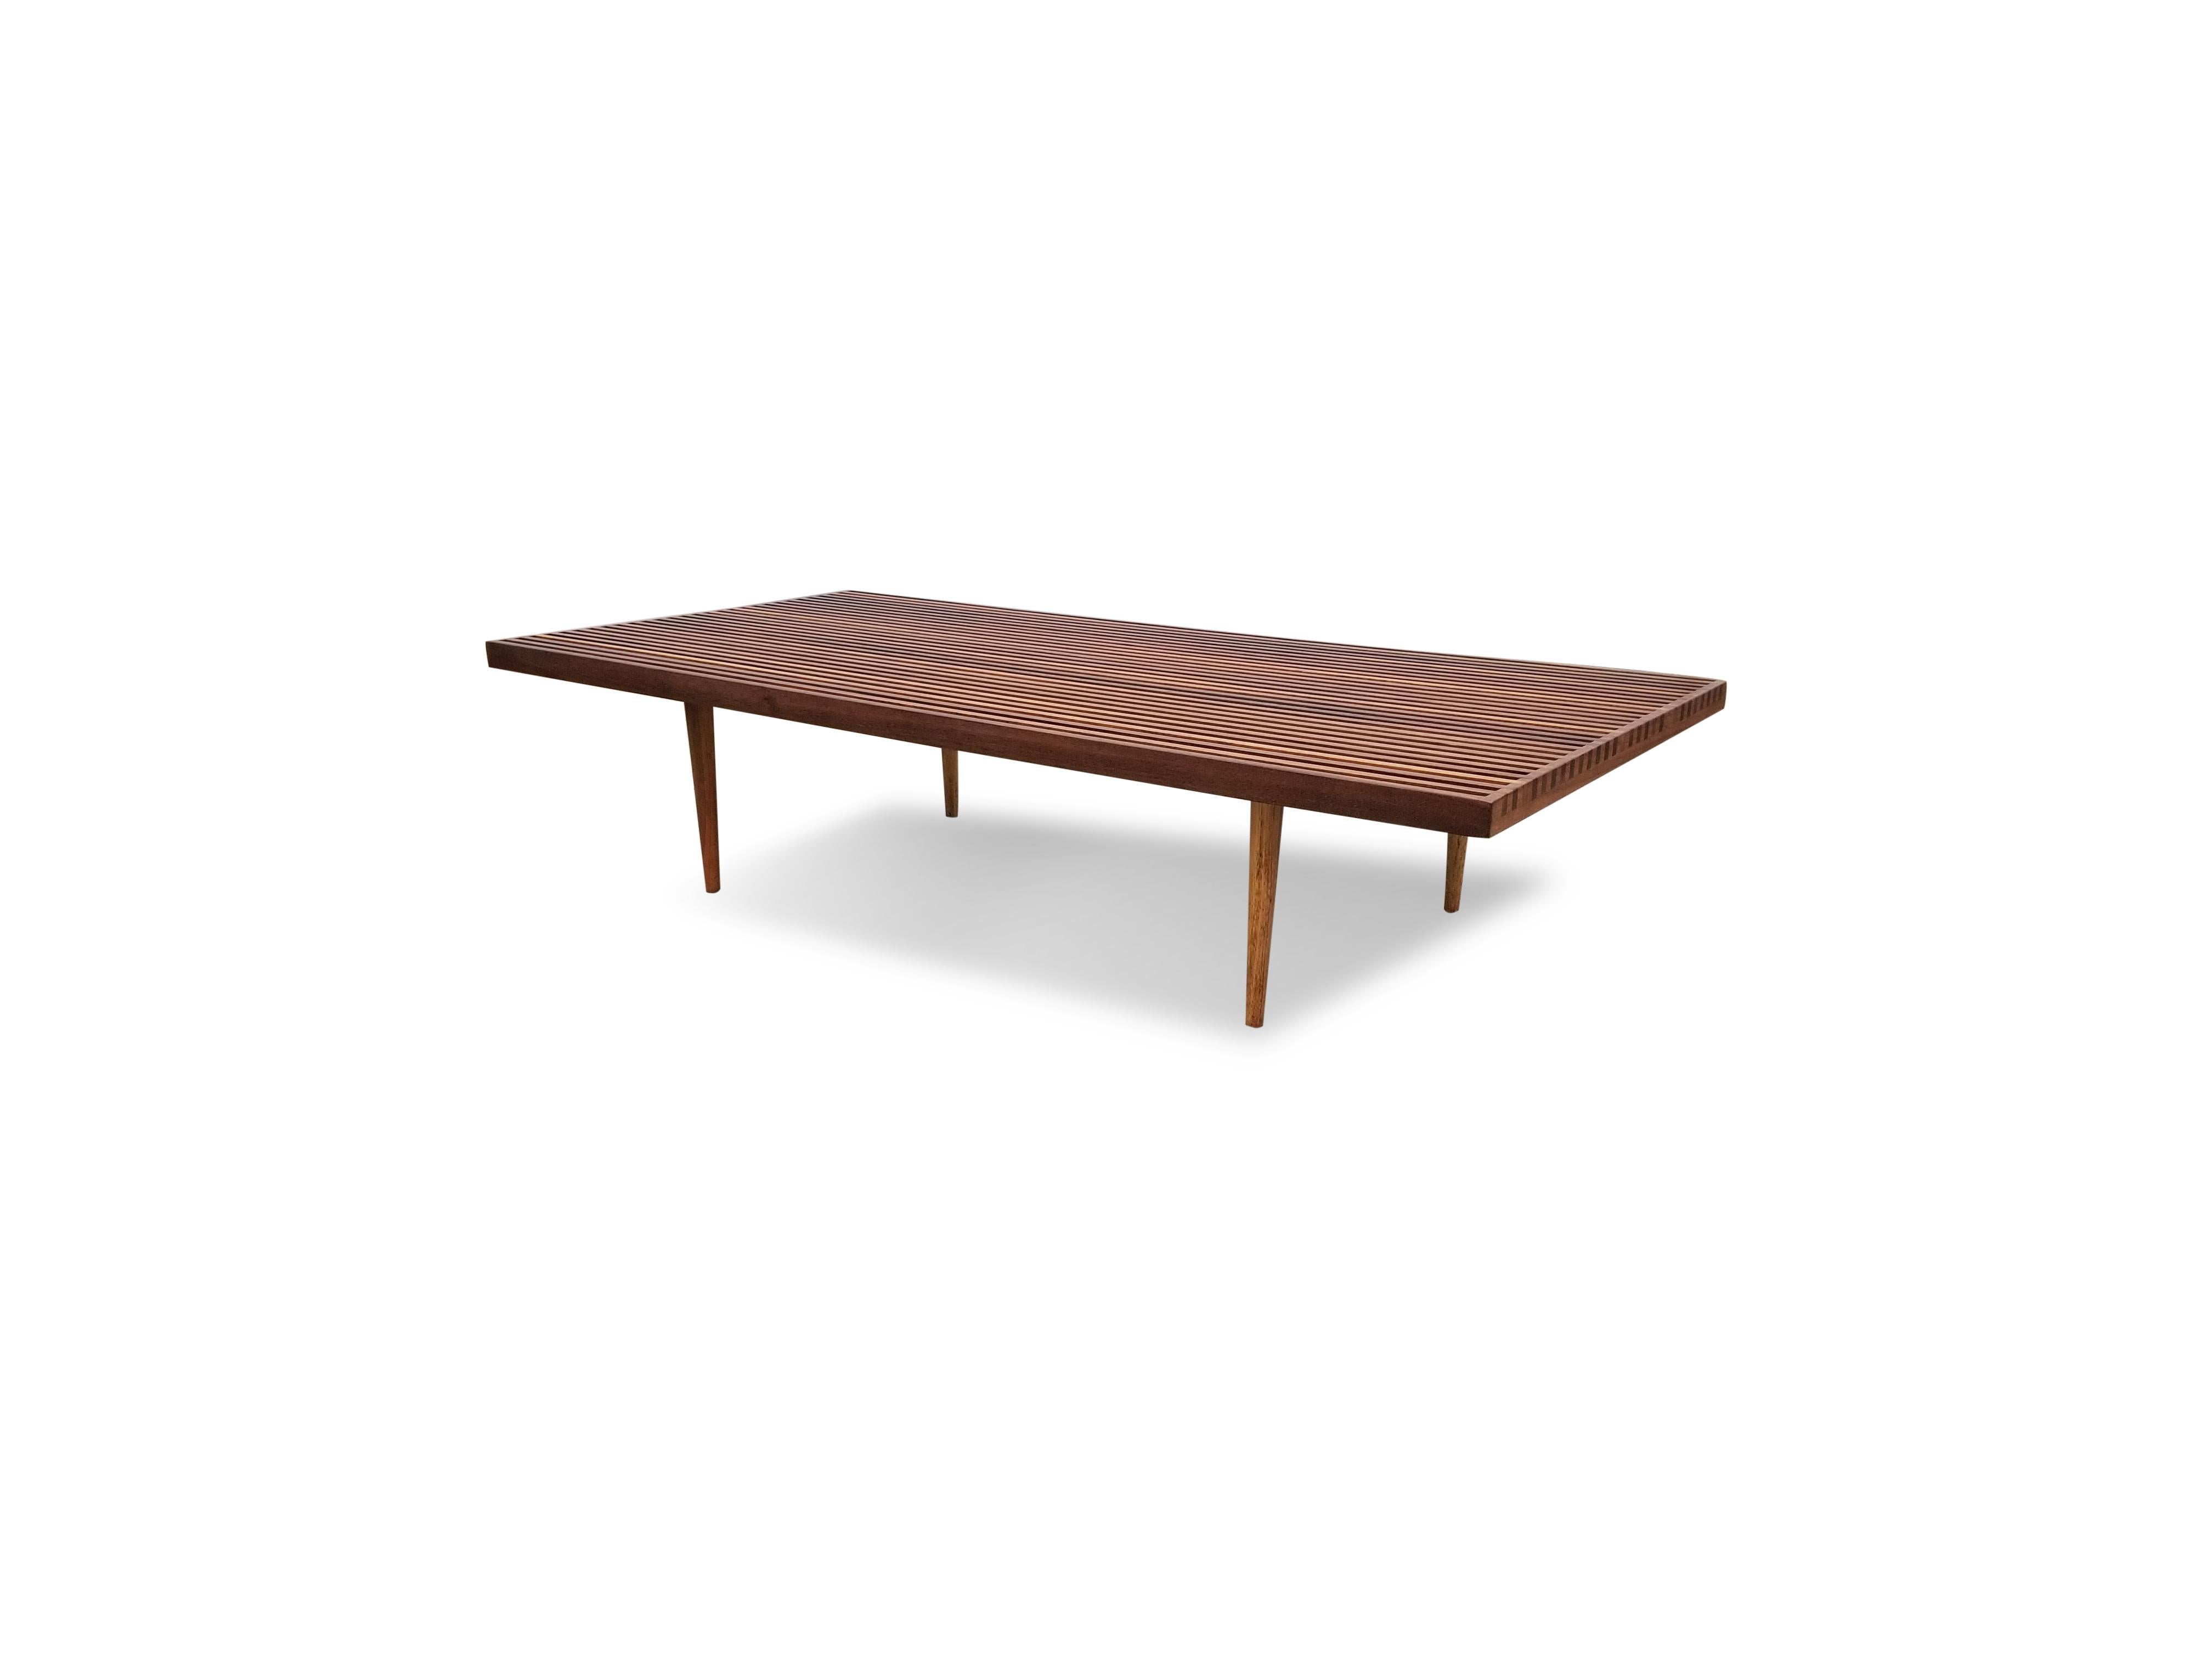 Mel Smilow double wide bench or coffee table.